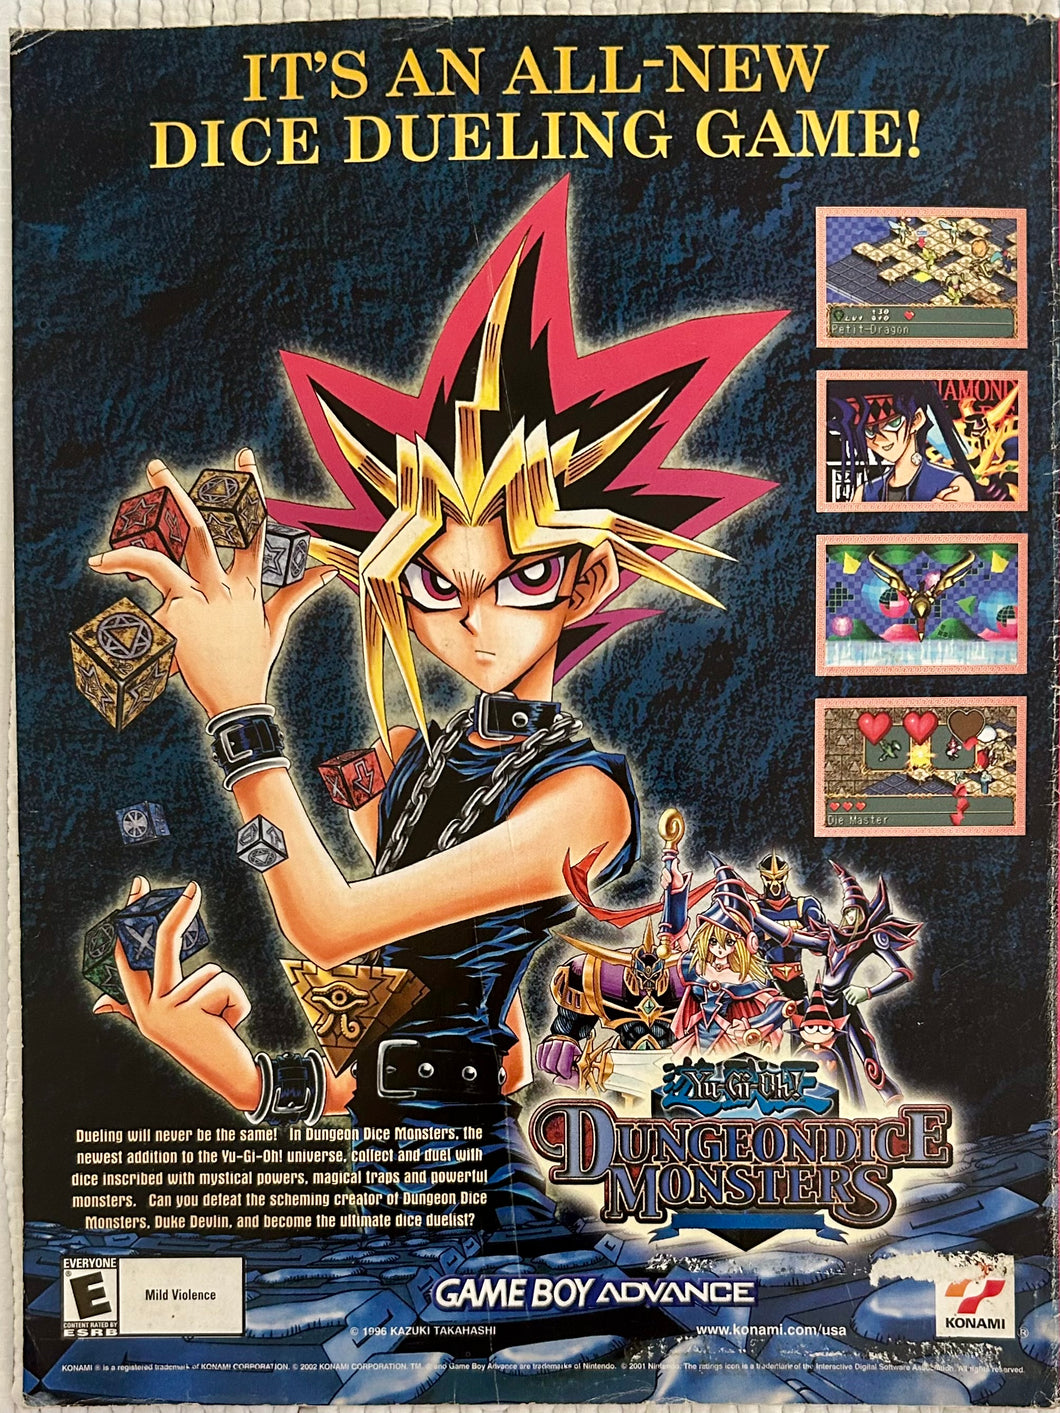 Yu-Gi-Oh! Dungeon Dice Monsters - GBA - Original Vintage Advertisement - Print Ads - Laminated A4 Poster